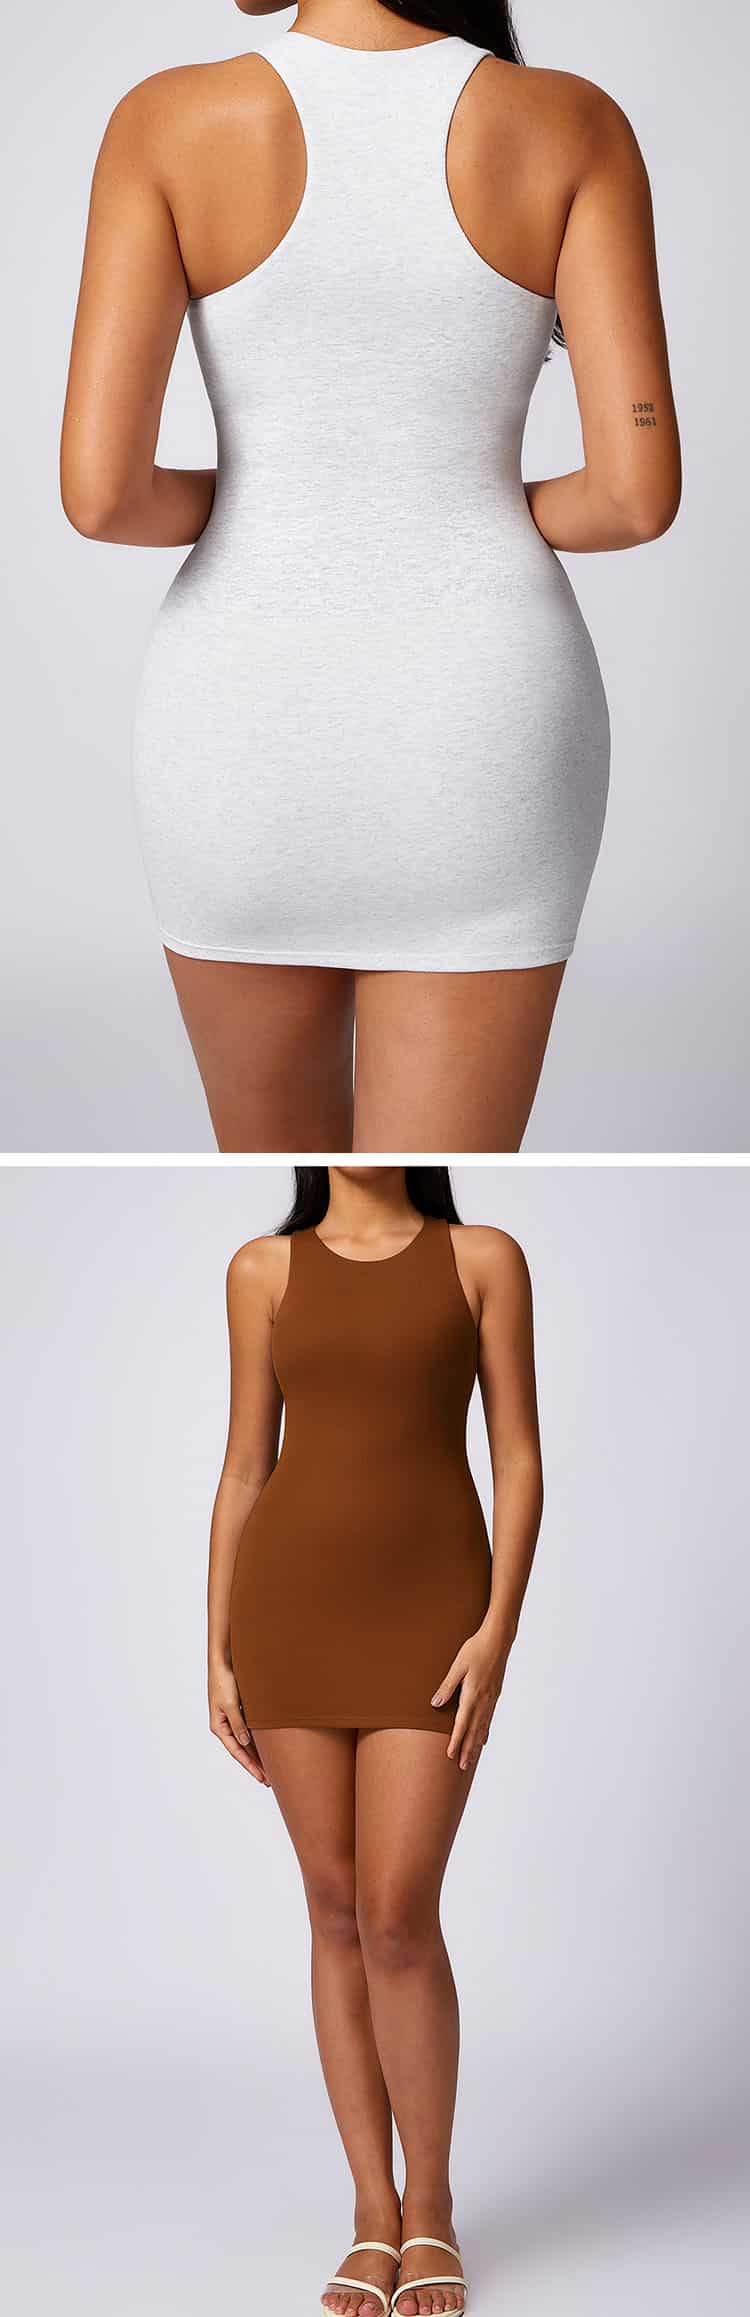 Open-back design is adopted to show sexy back and slim